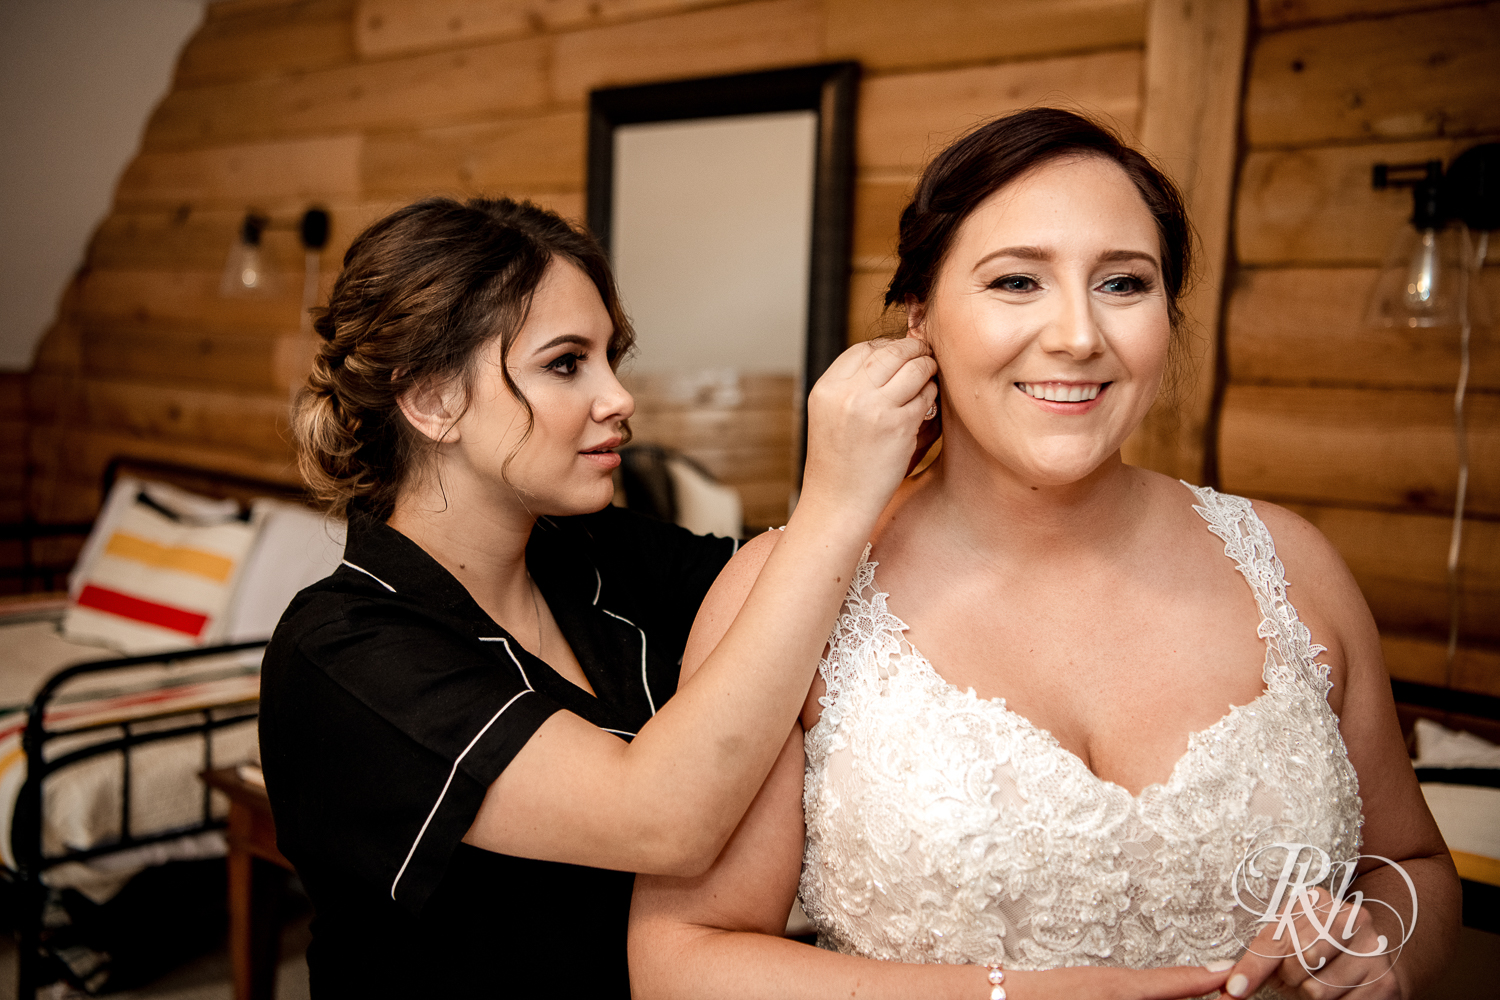 Bride putting in earring before the wedding at a cabin A-frame in Stillwater, Minnesota.